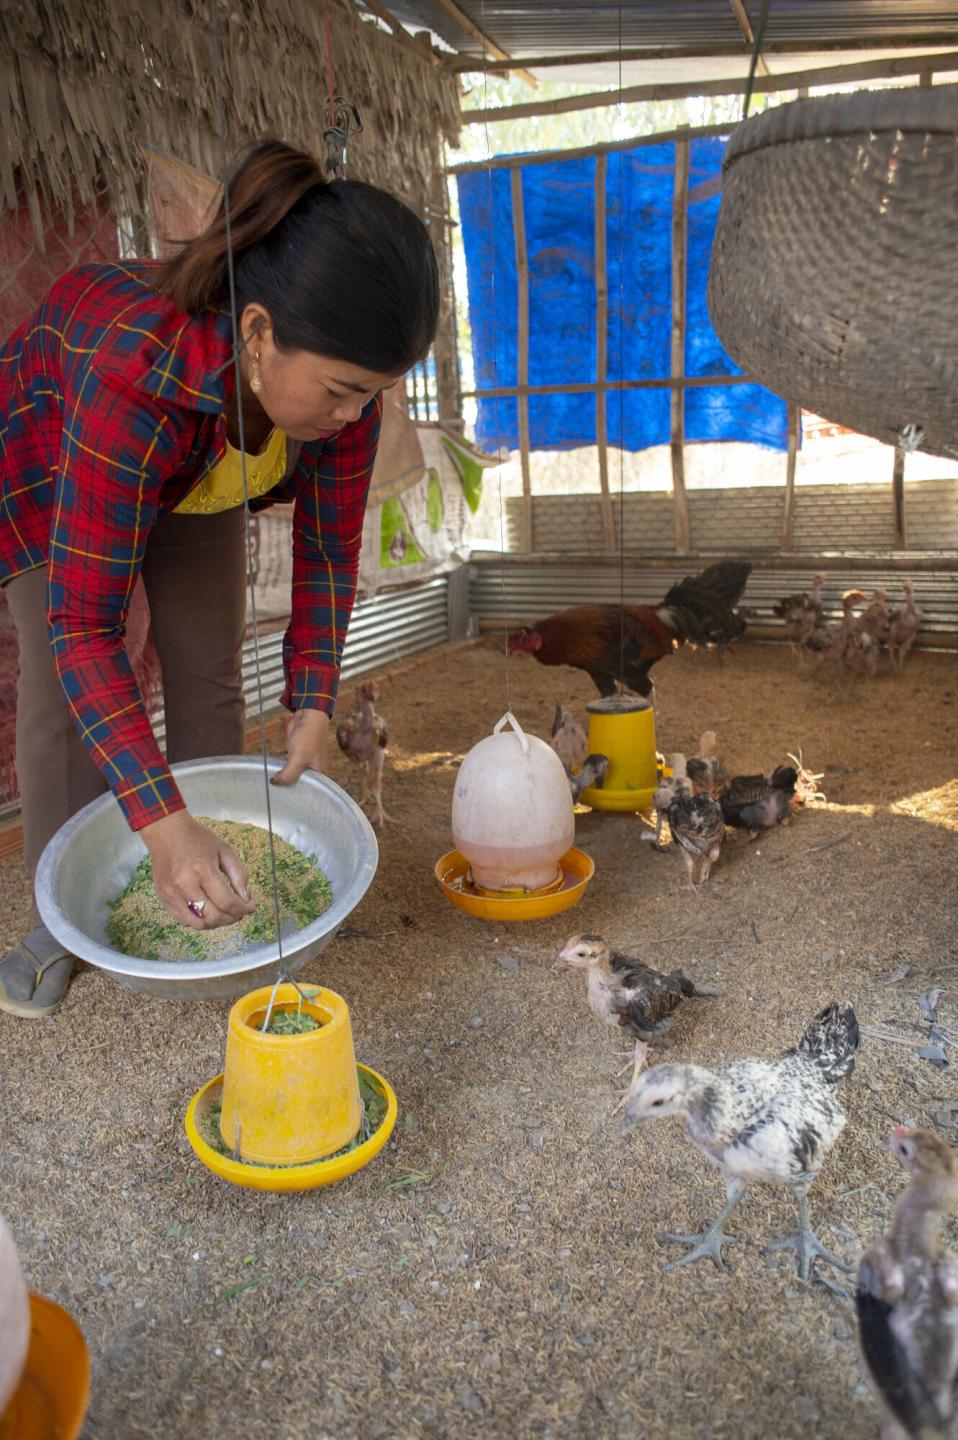 A Cambodian woman holds a bowl of chicken feed and fills the chicken feeders